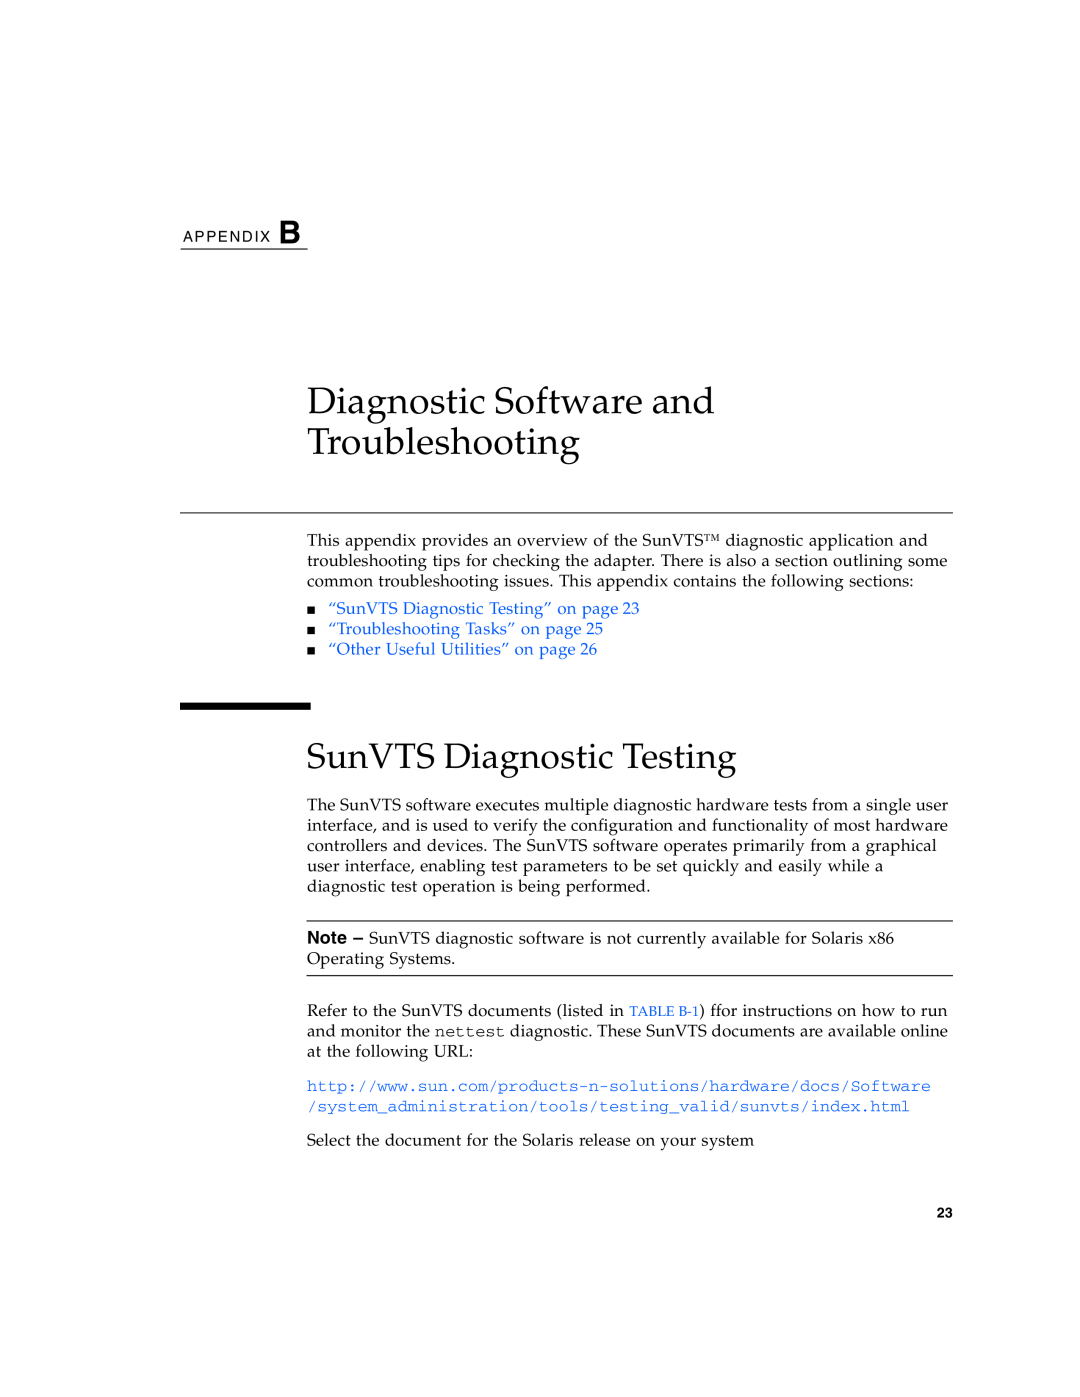 Sun Microsystems PCI manual Diagnostic Software and Troubleshooting, SunVTS Diagnostic Testing 